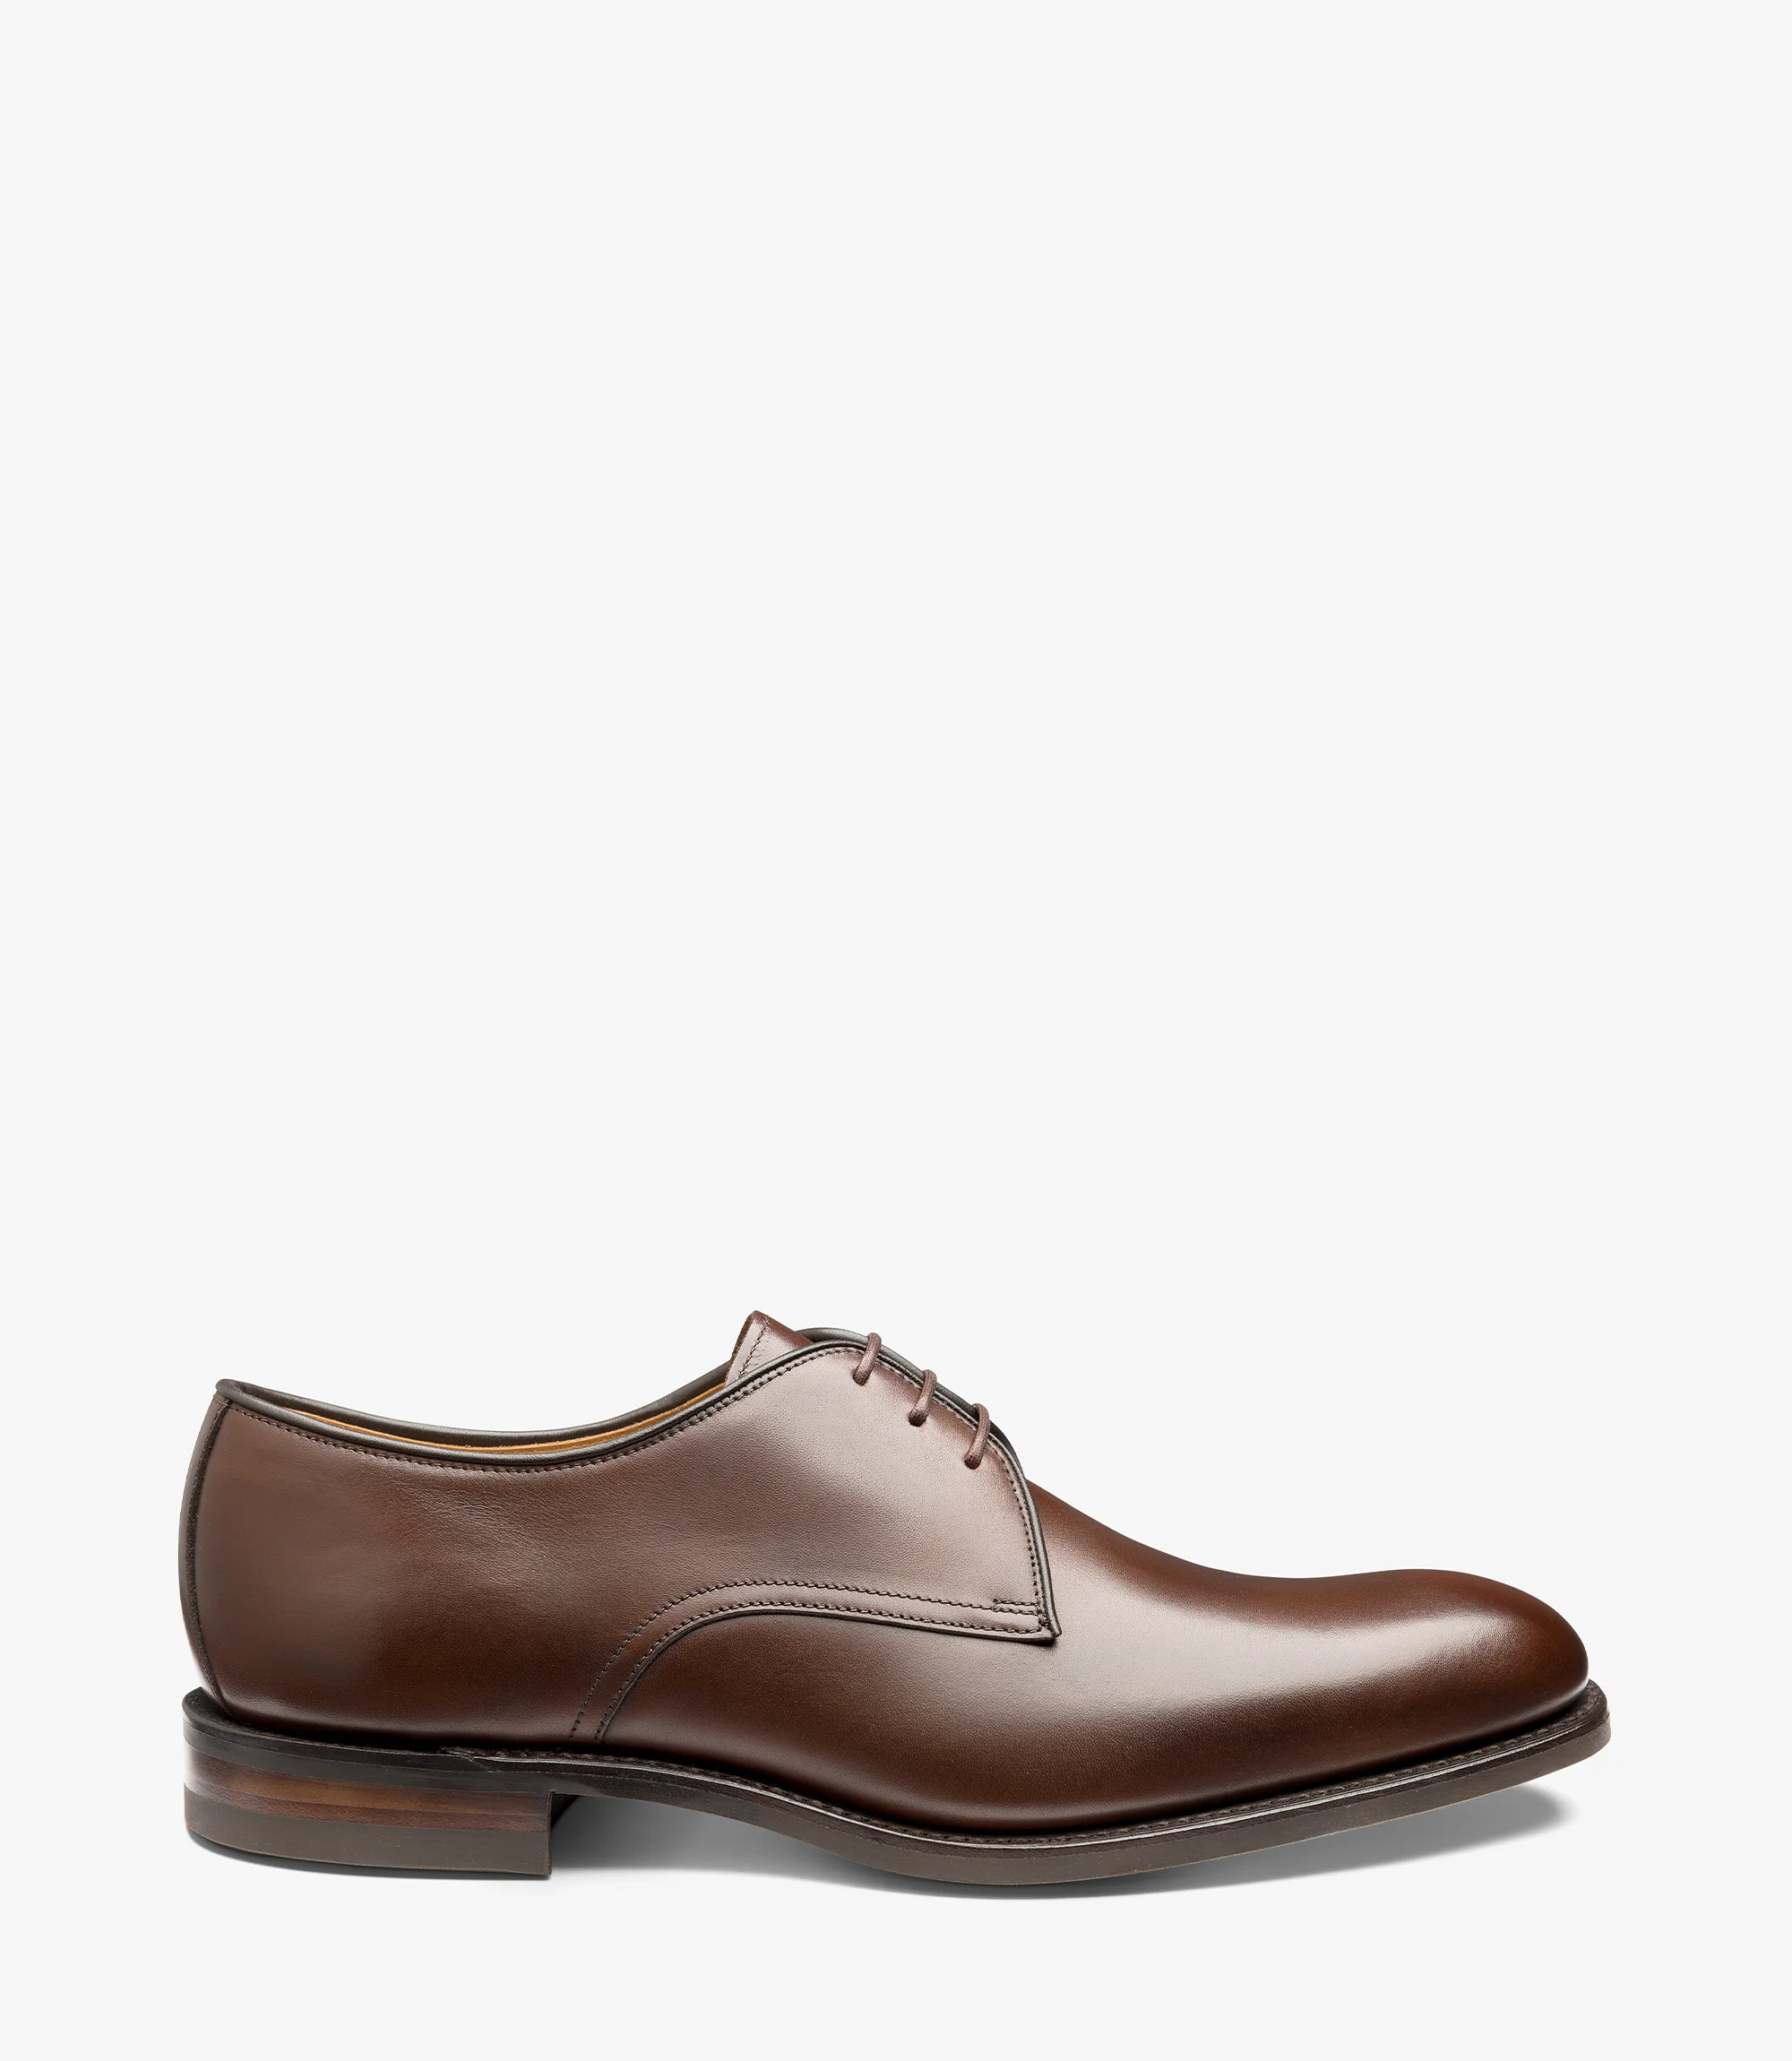 Brown | English Men's Shoes & Boots | Loake Shoemakers